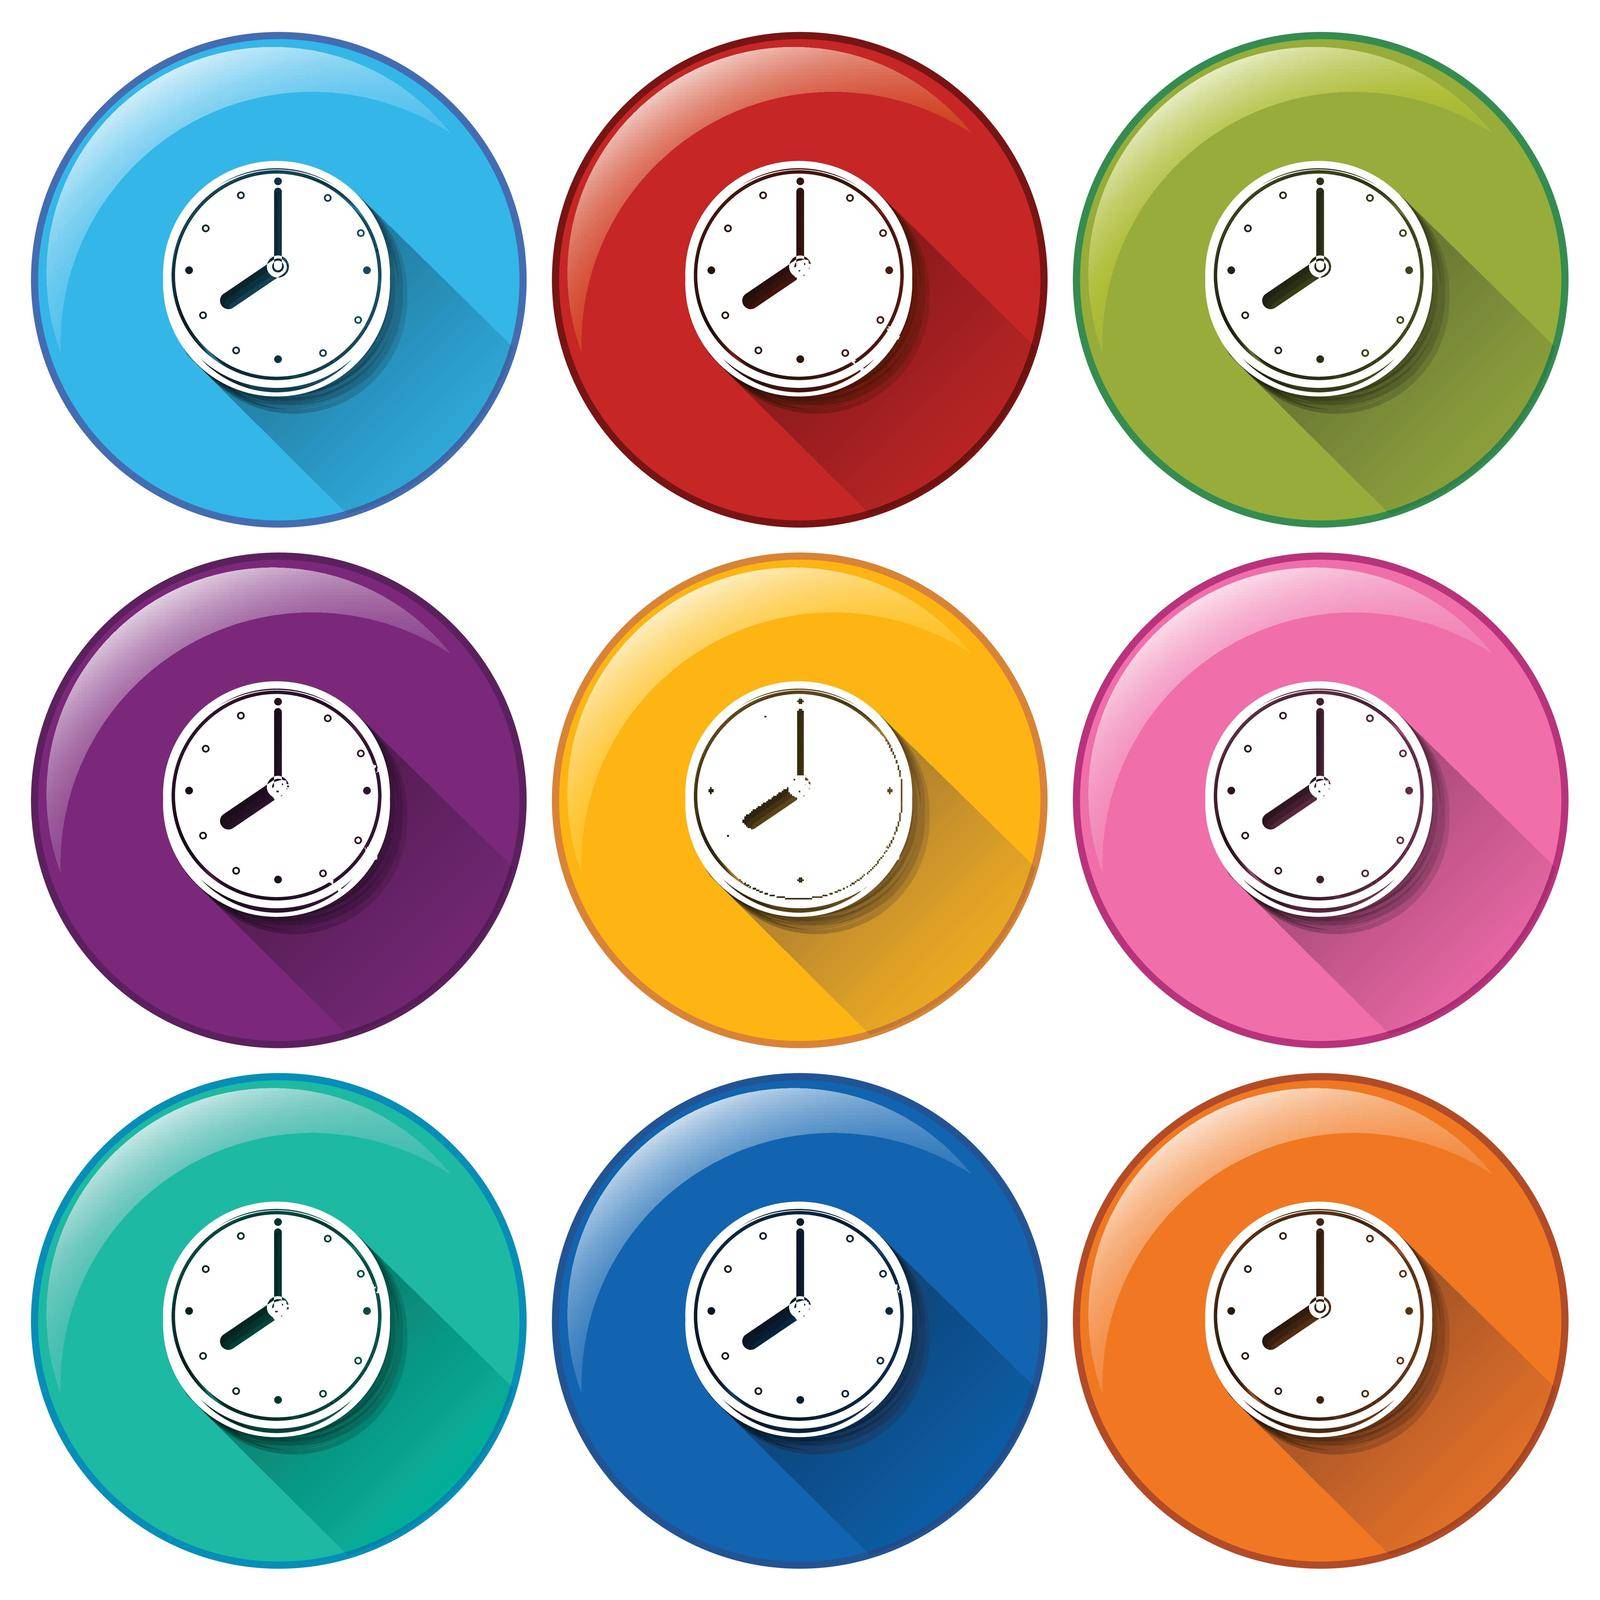 Illustration of different color time icons